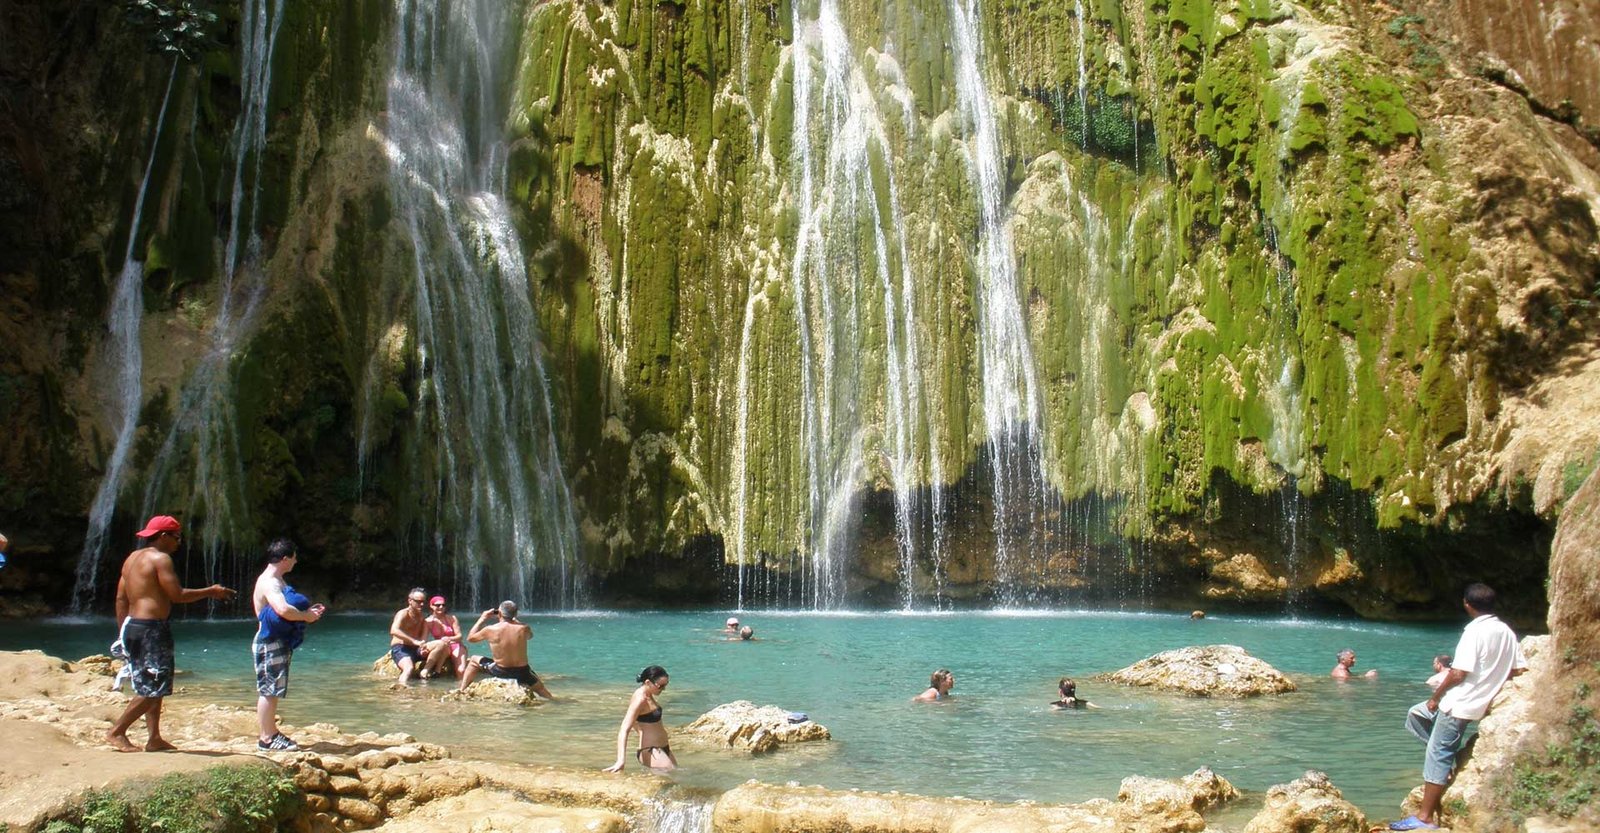 One of the Best Excursions in Samana : Salto Del Limon Waterfall Tour from Las Terrenas, Samana Dominican Republic.